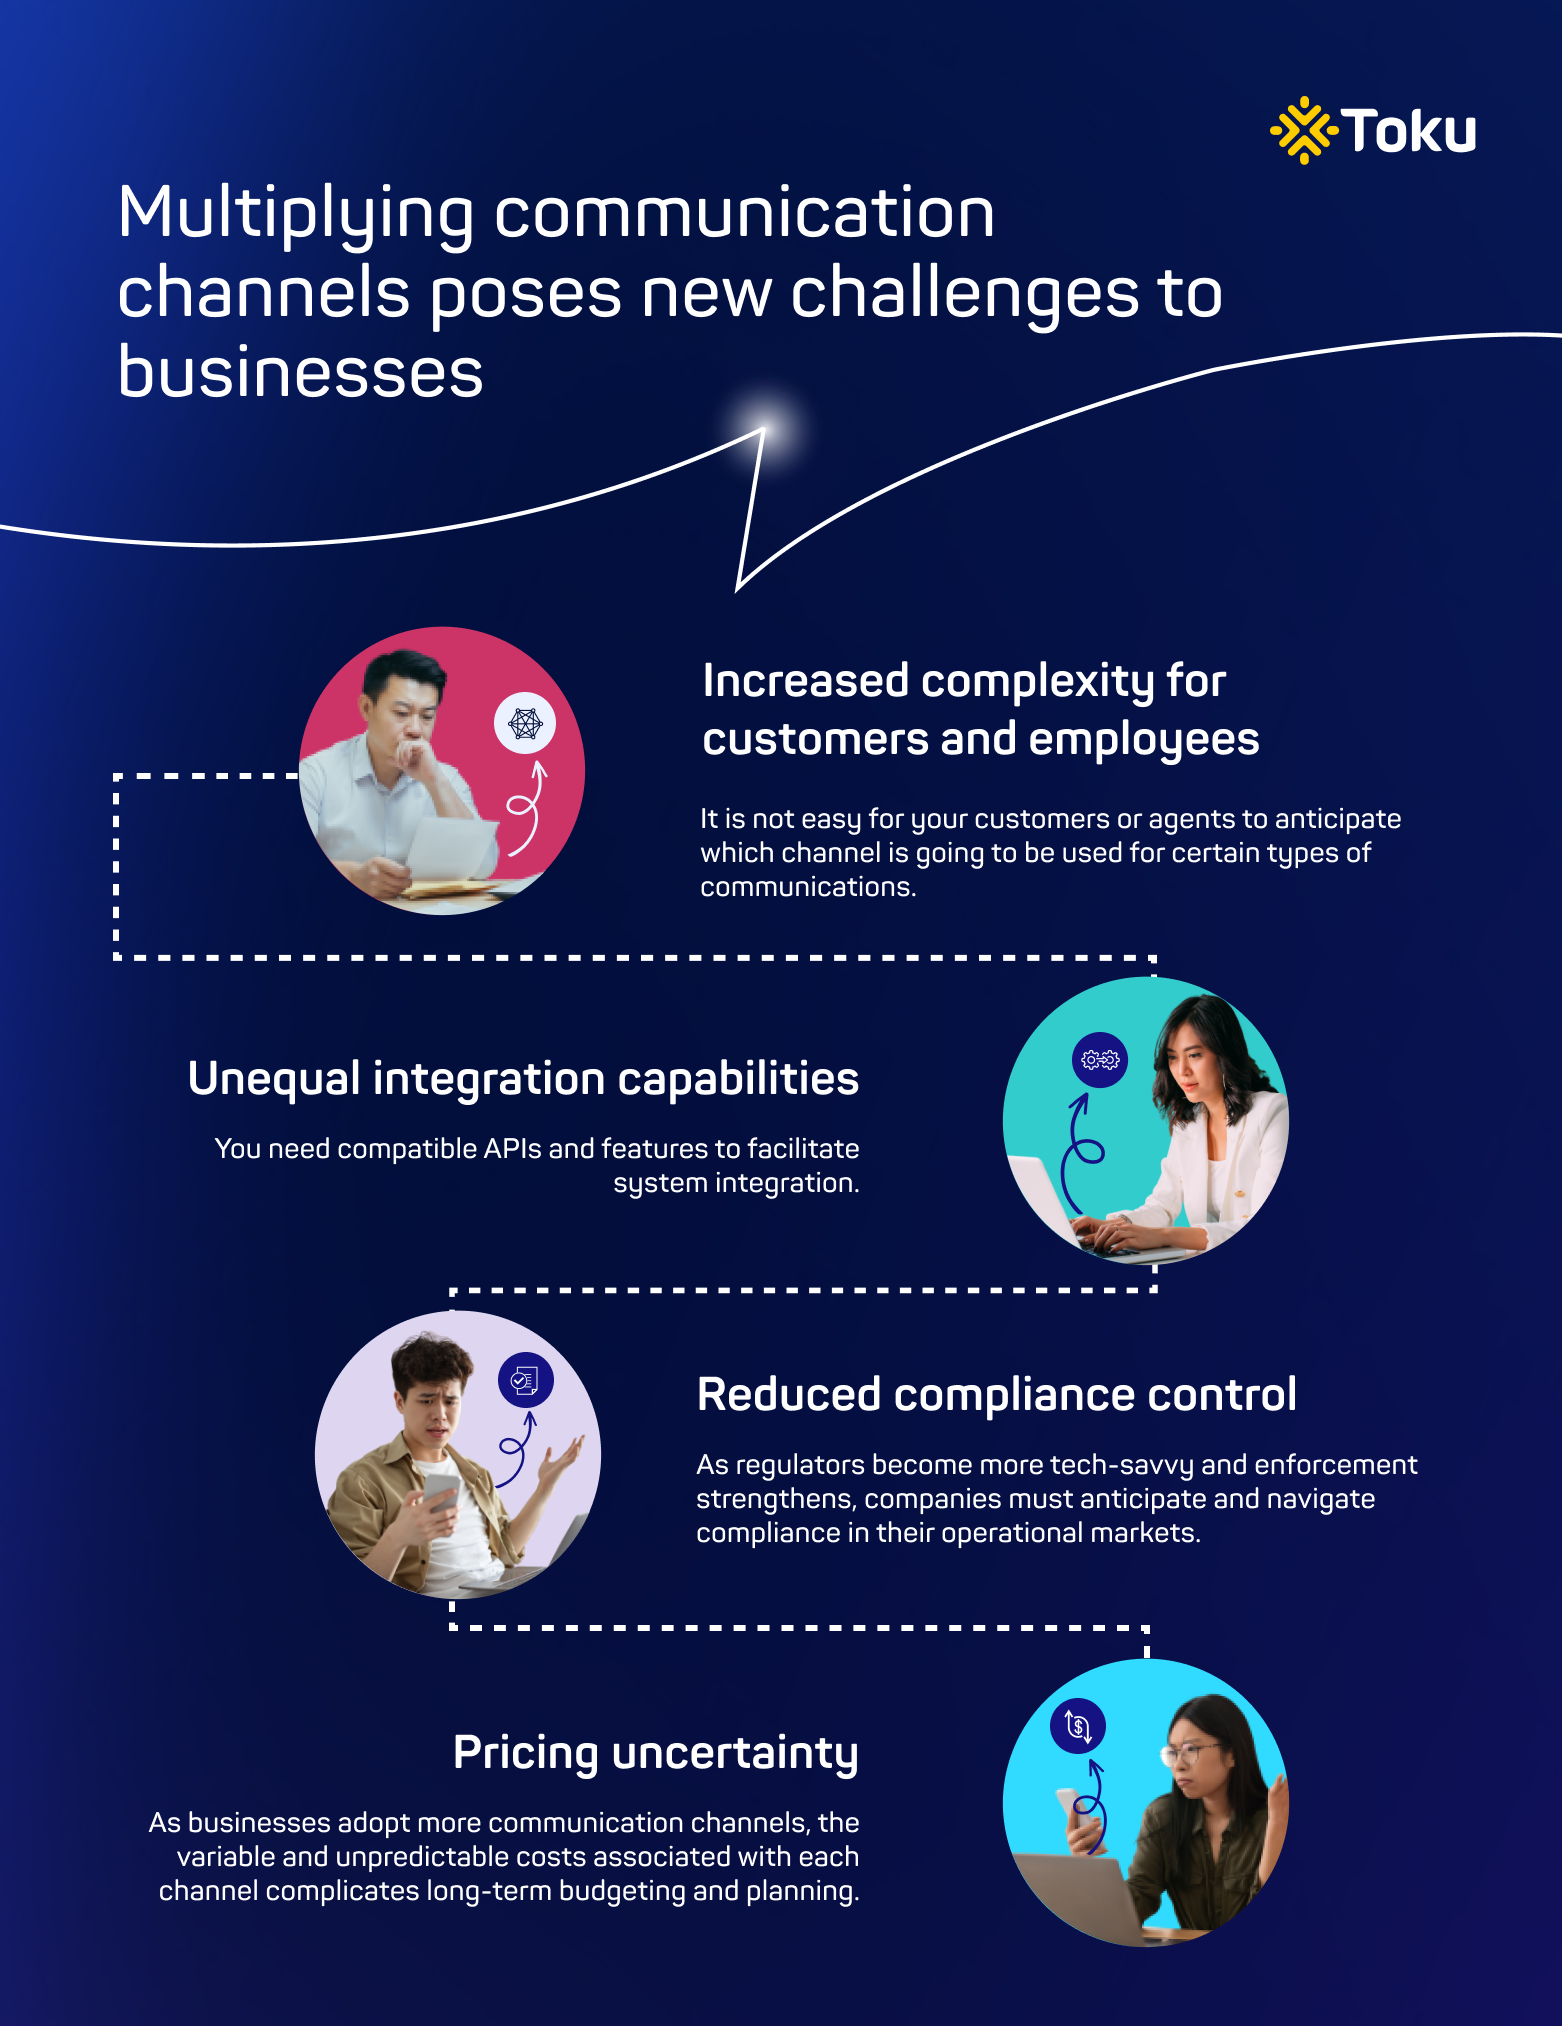 challenges of multiplying communication channels